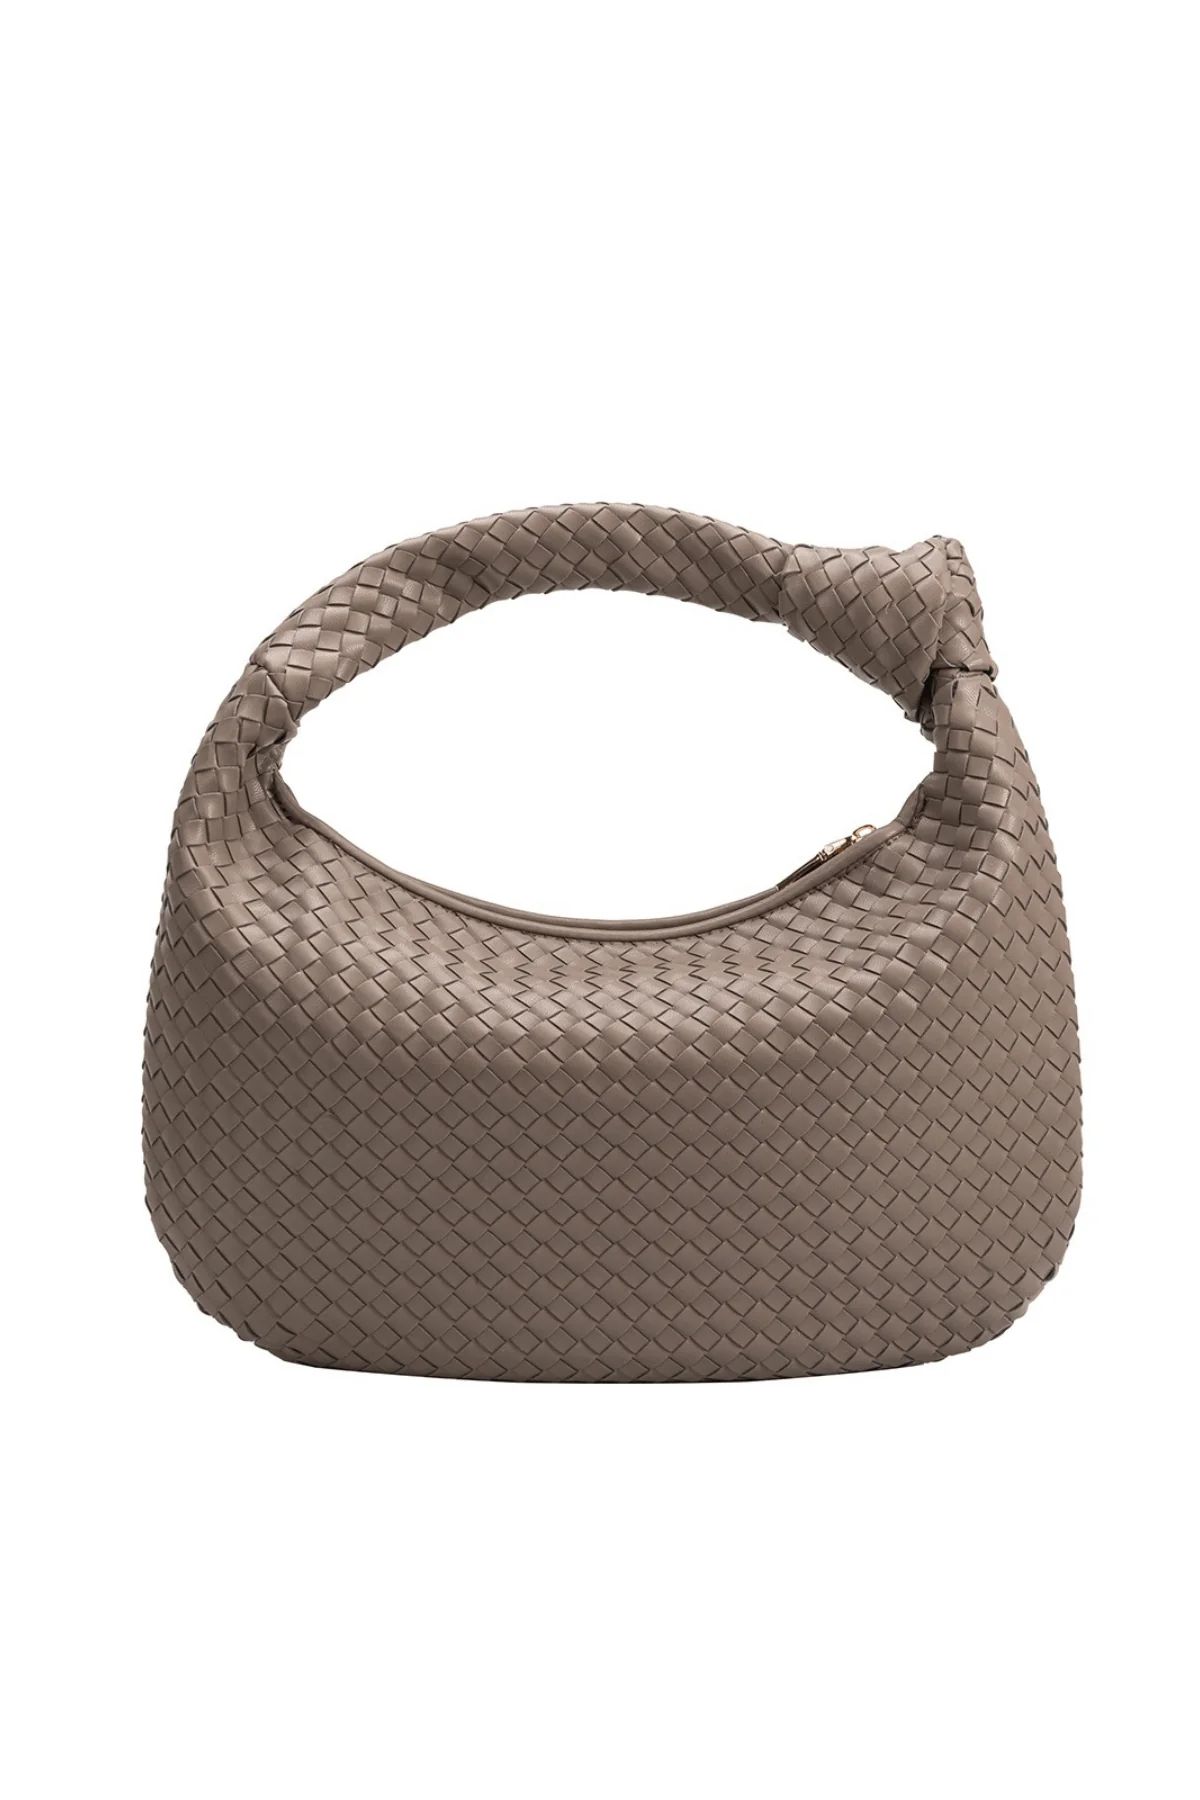 Melie Bianco Knotted Woven Vegan Leather Large Bag | Social Threads